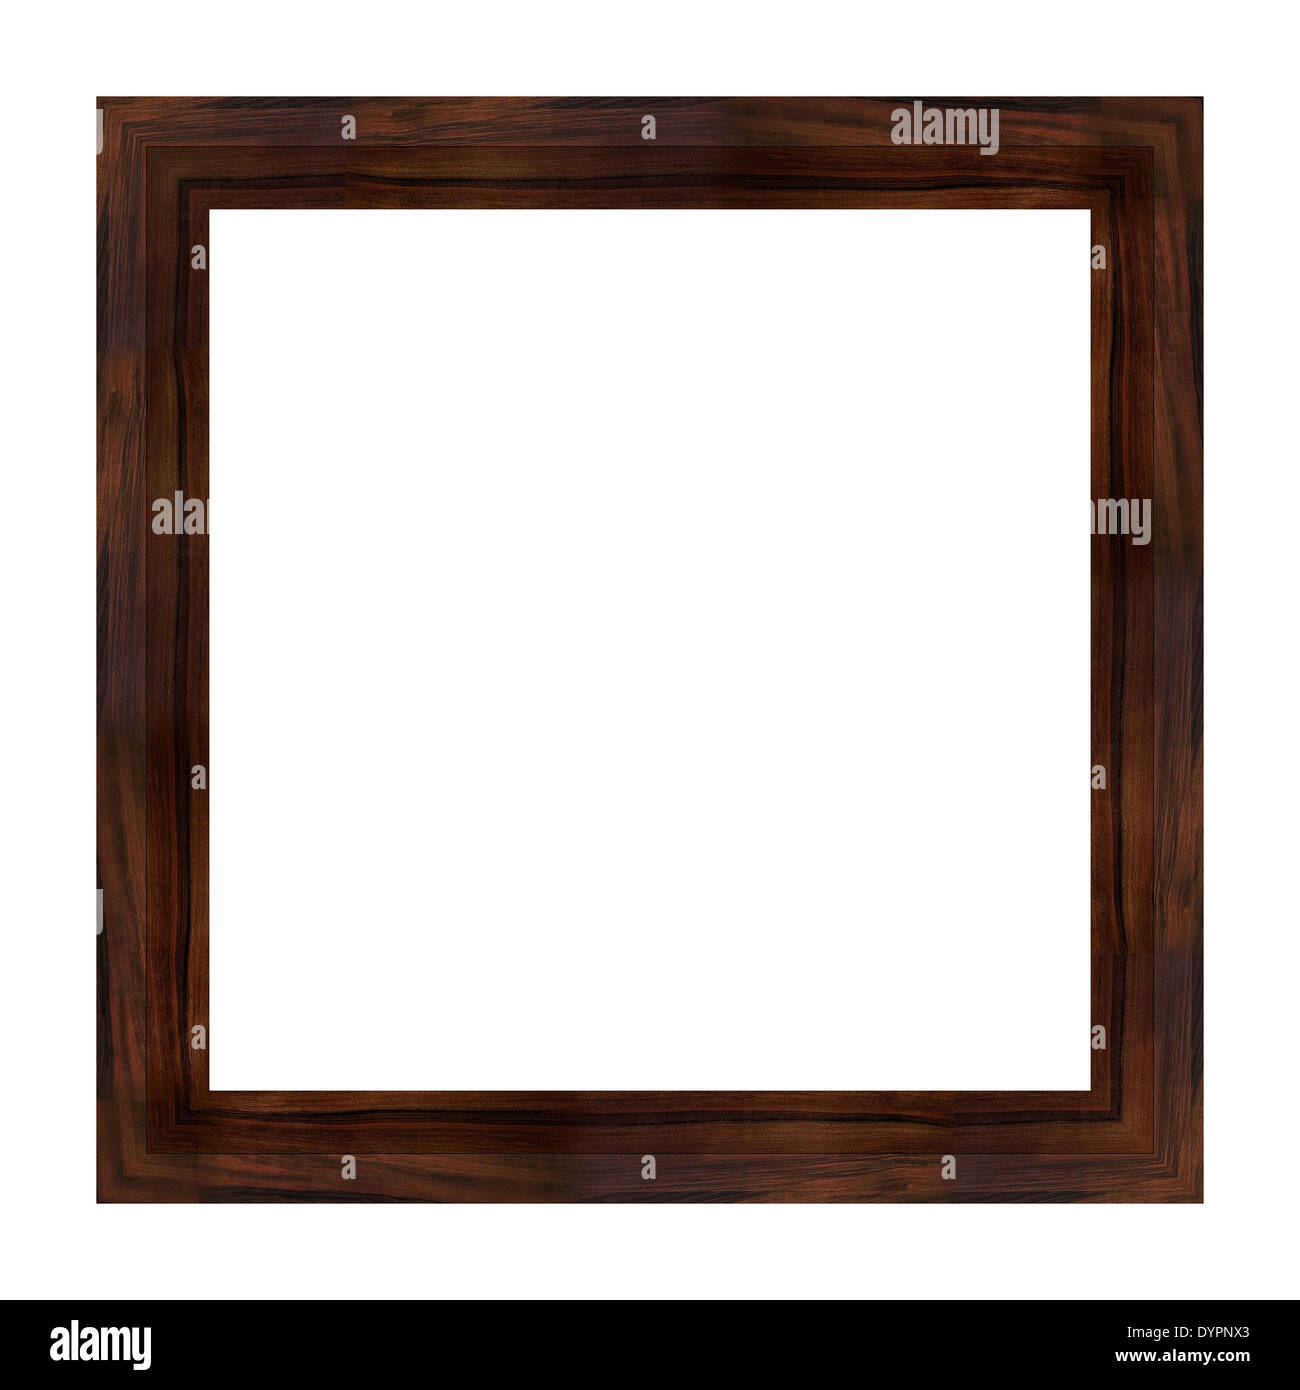 Antique wooden photo picture frame with white background Stock Photo